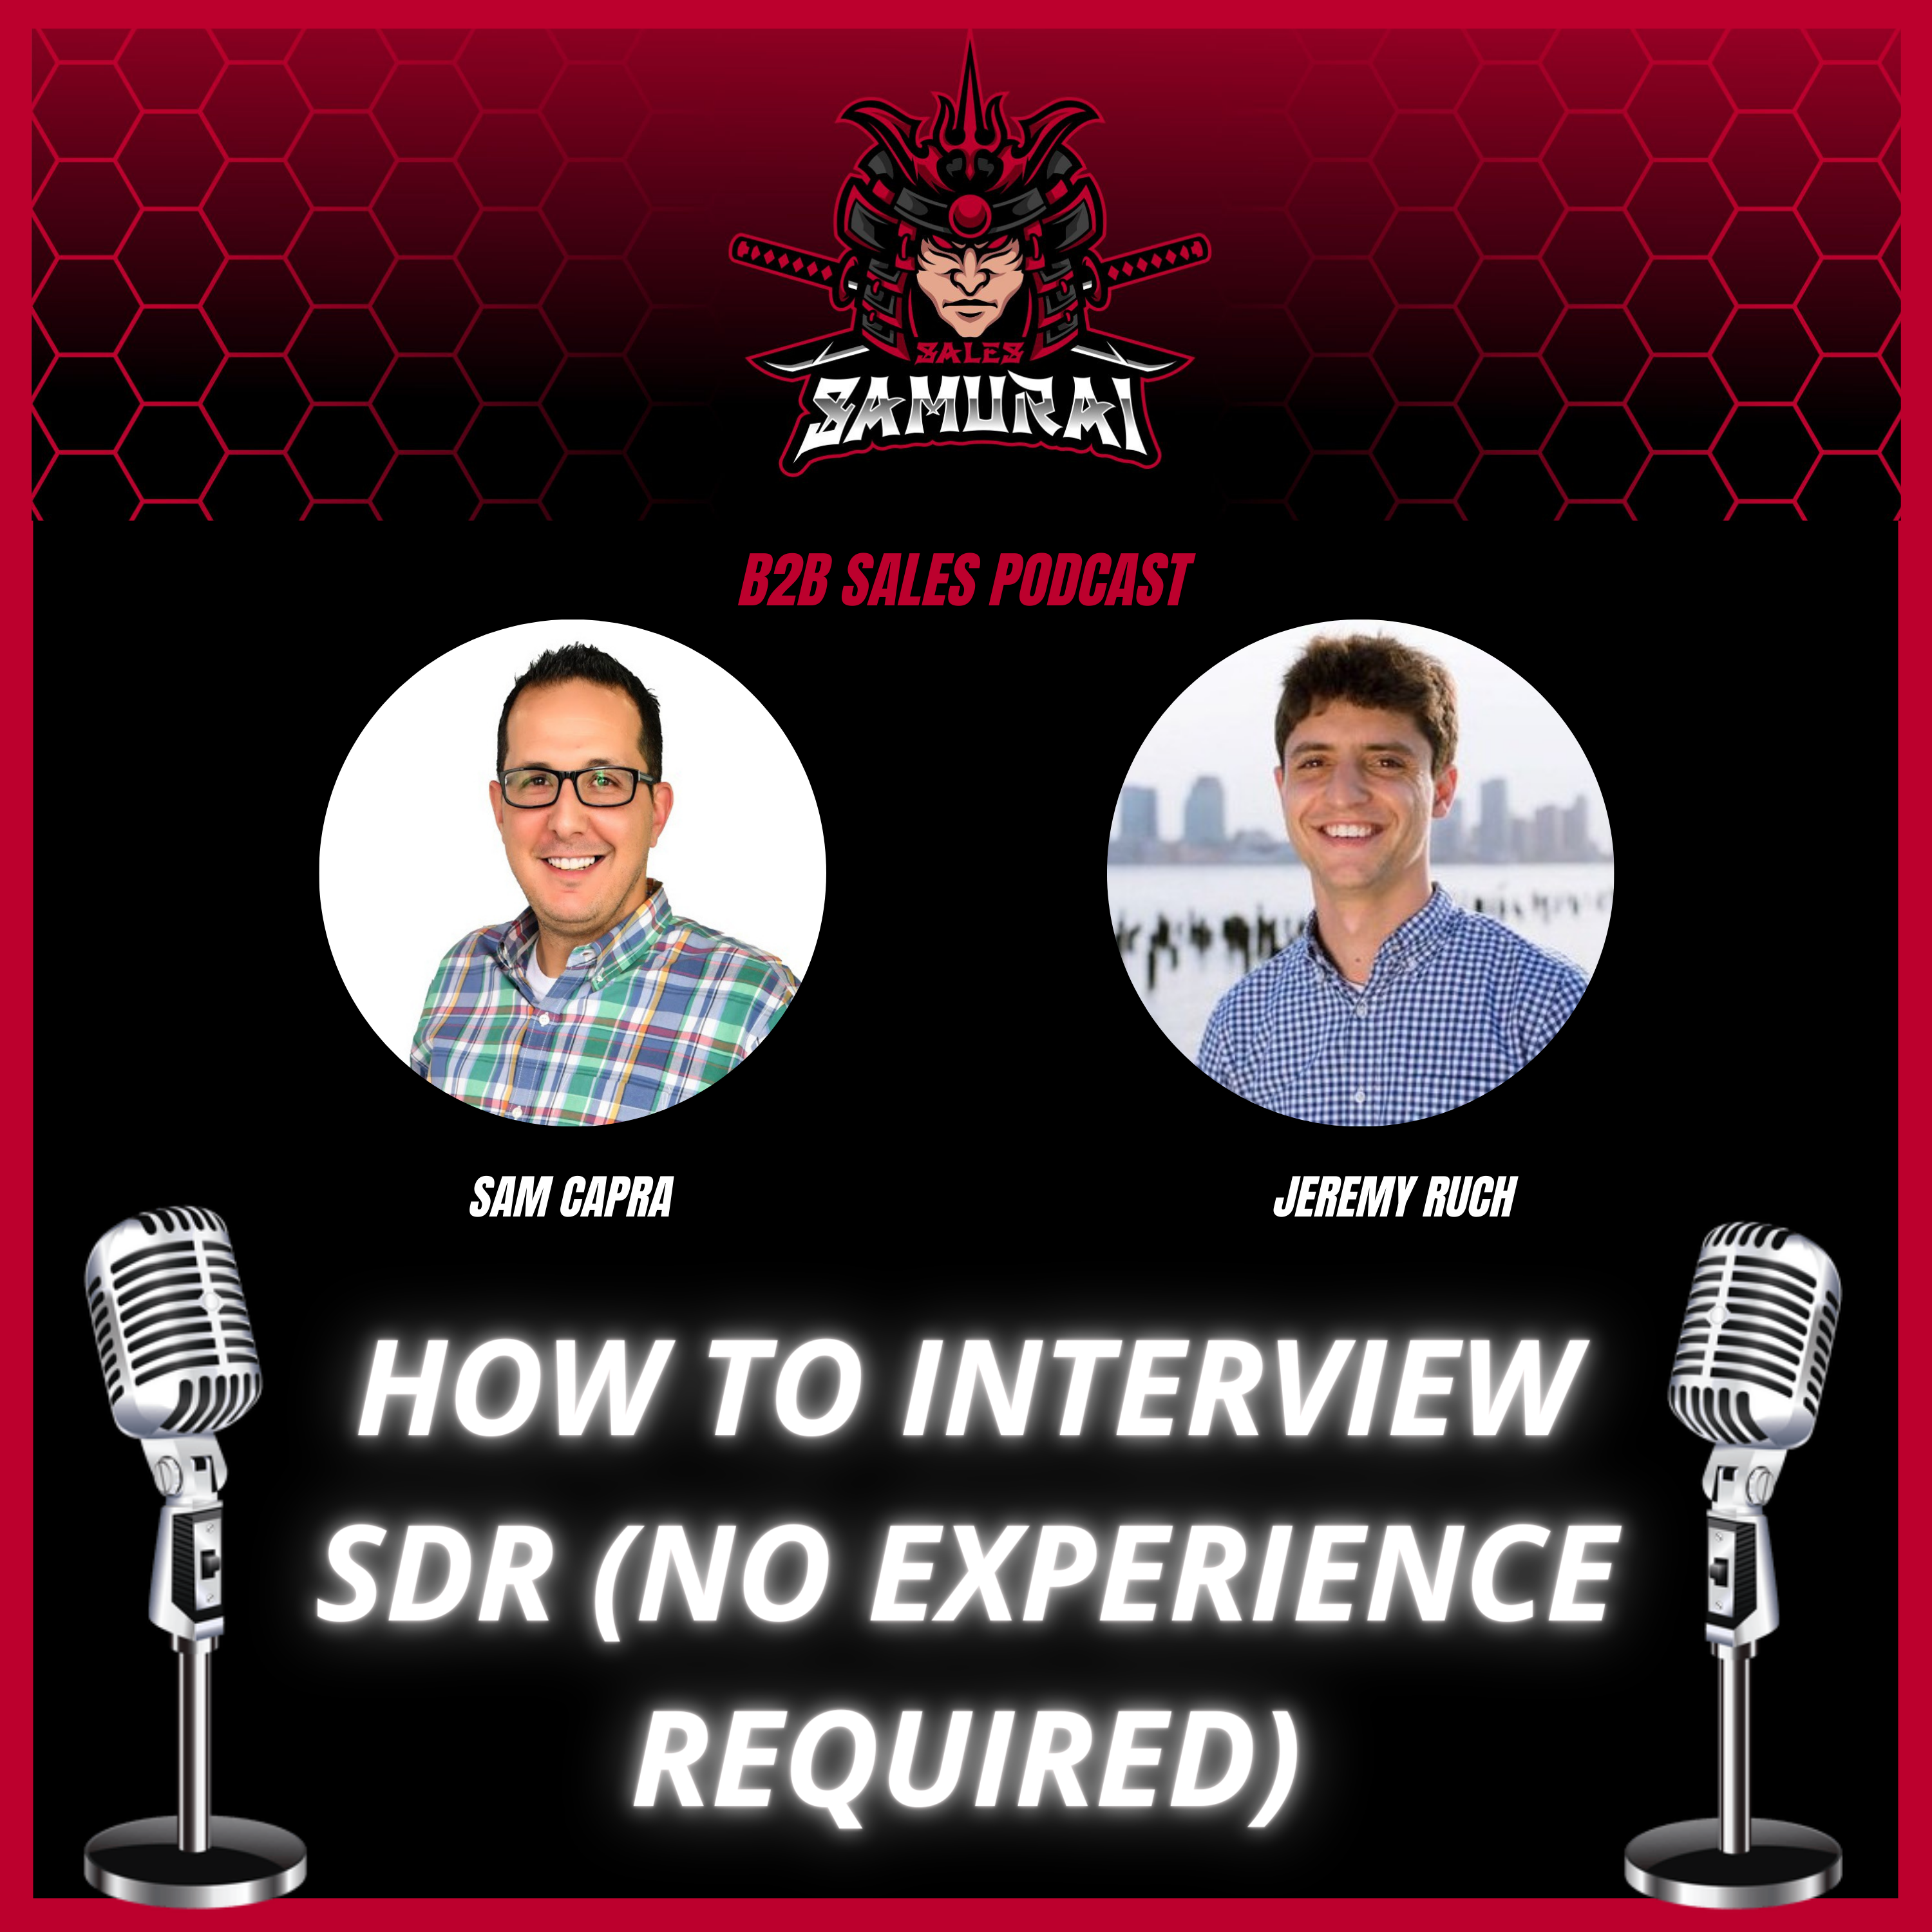 How to Interview SDR (No Experience Required)